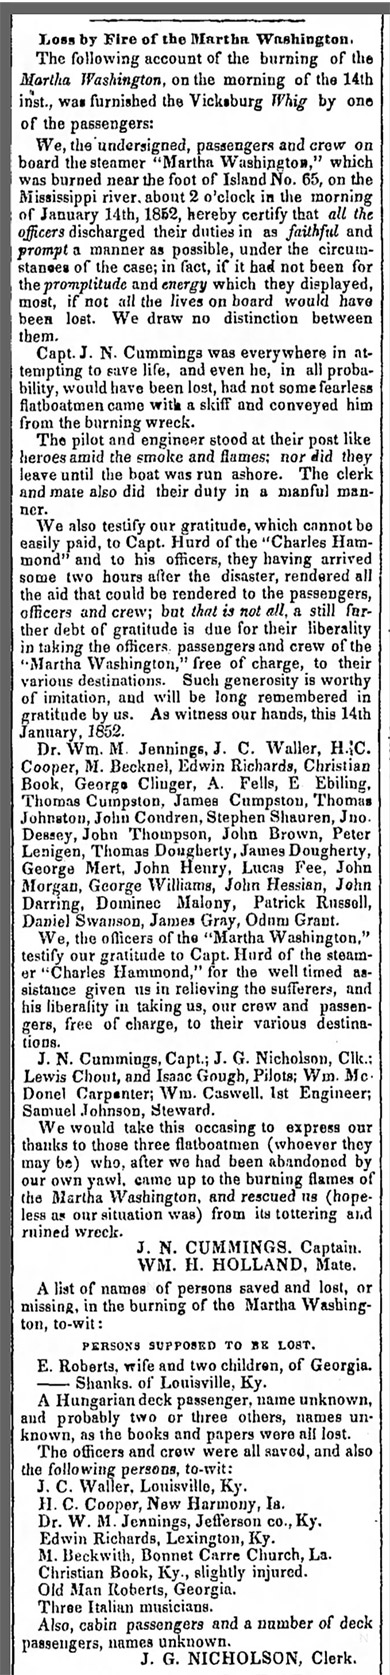 "Loss by fire of the Martha Washington" newspaper clipping